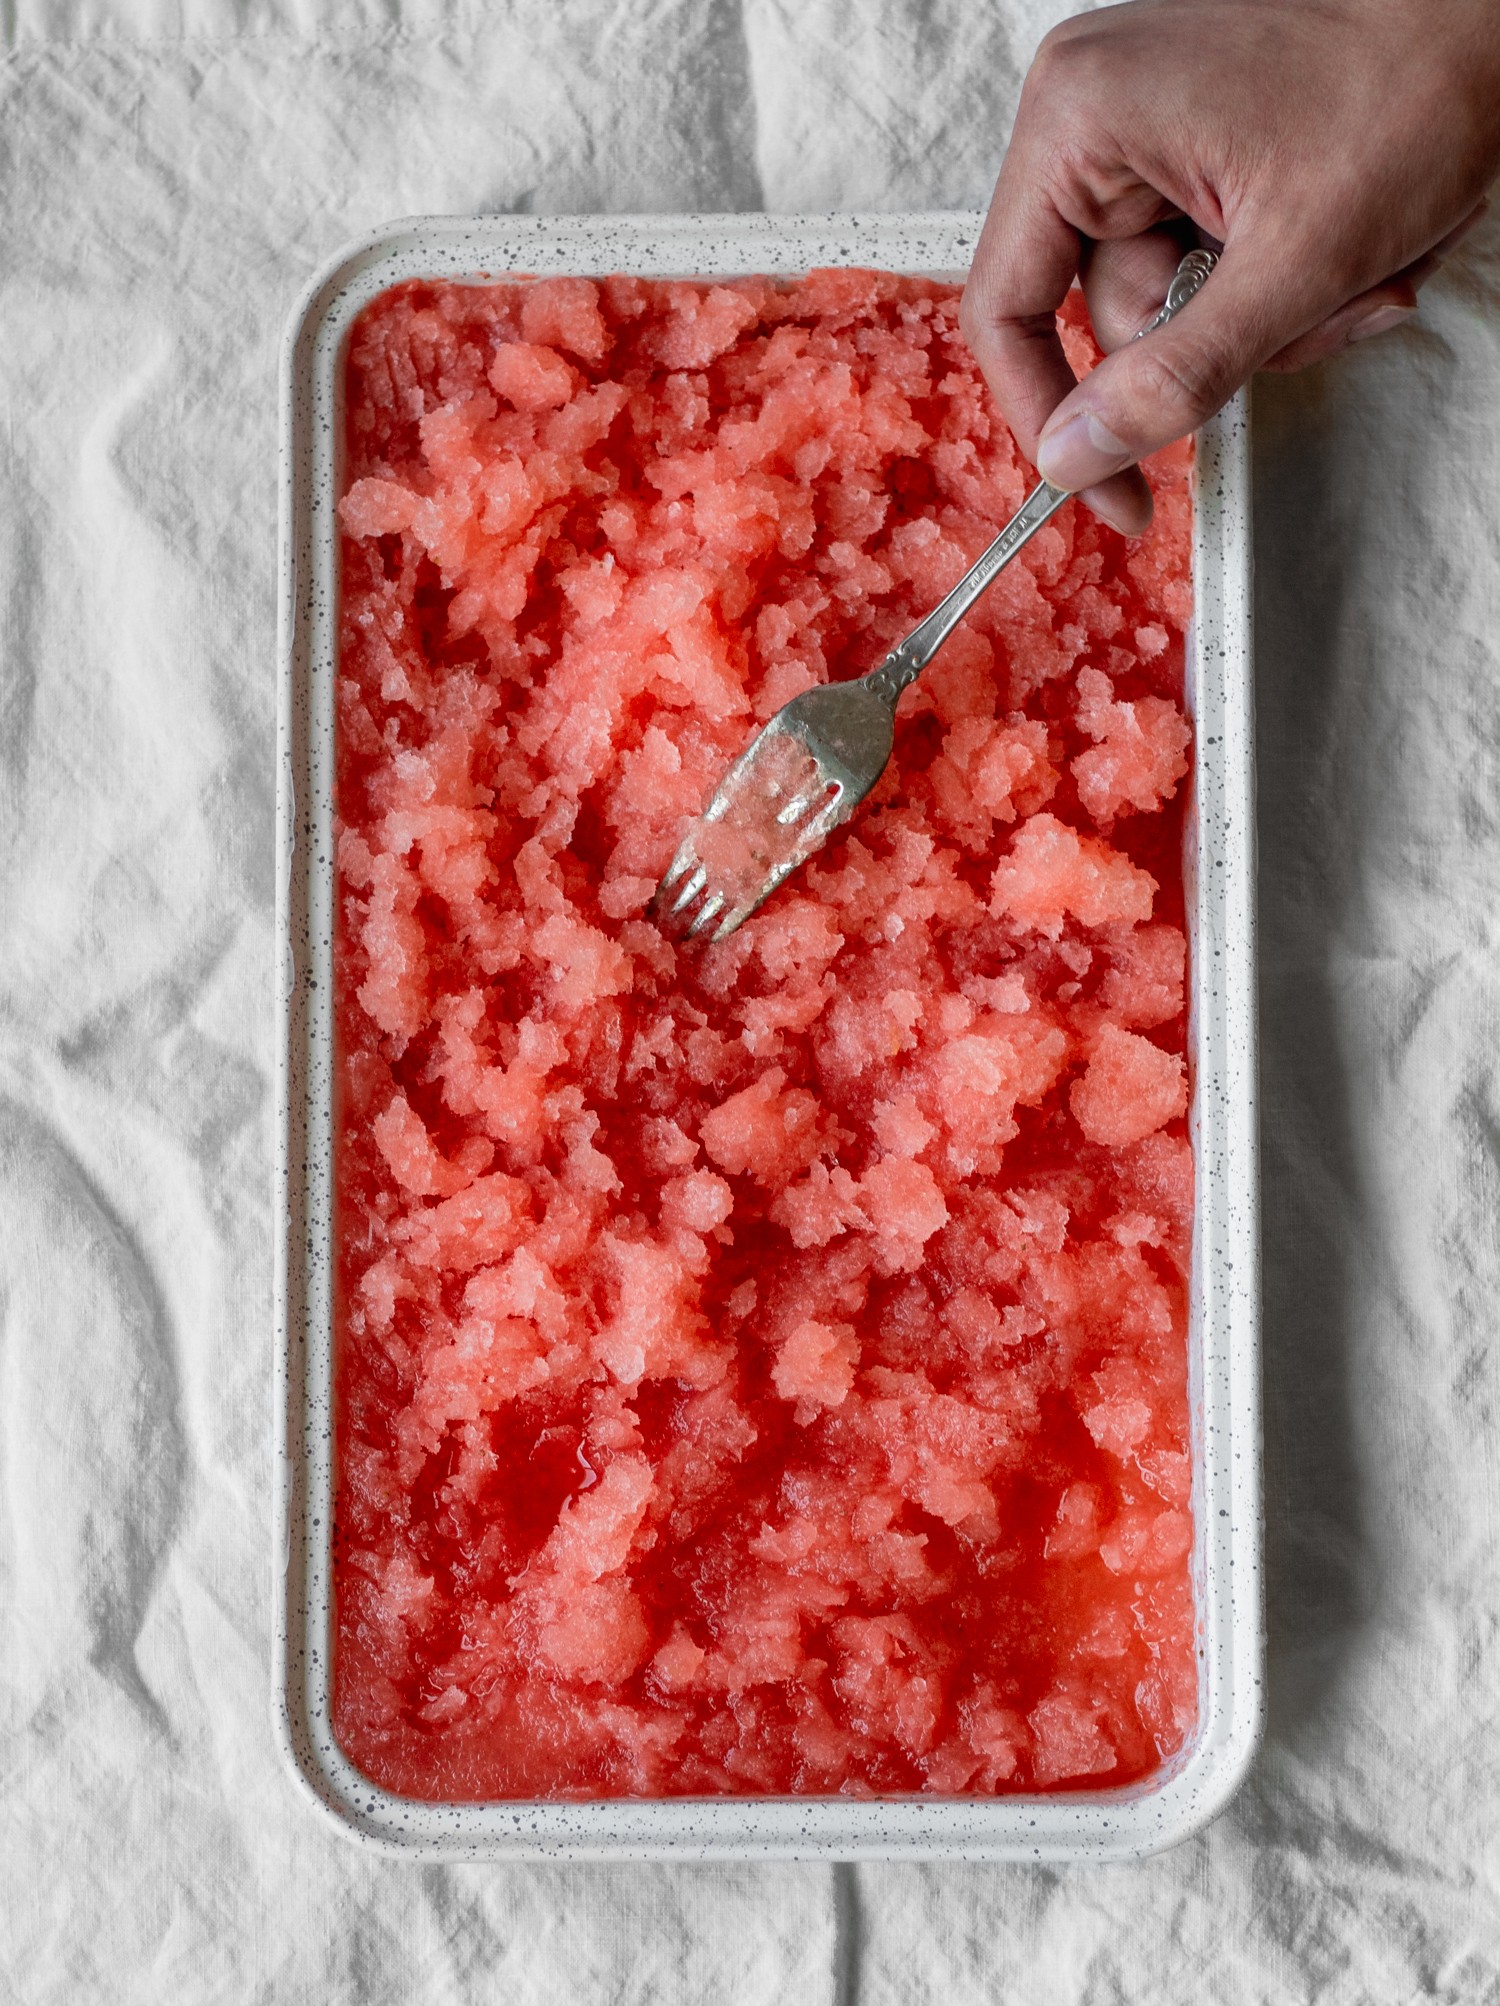 An overhead image of a strawberry aperol spritz granita in a white tin on a white table cloth with a man's hand scraping the granita.